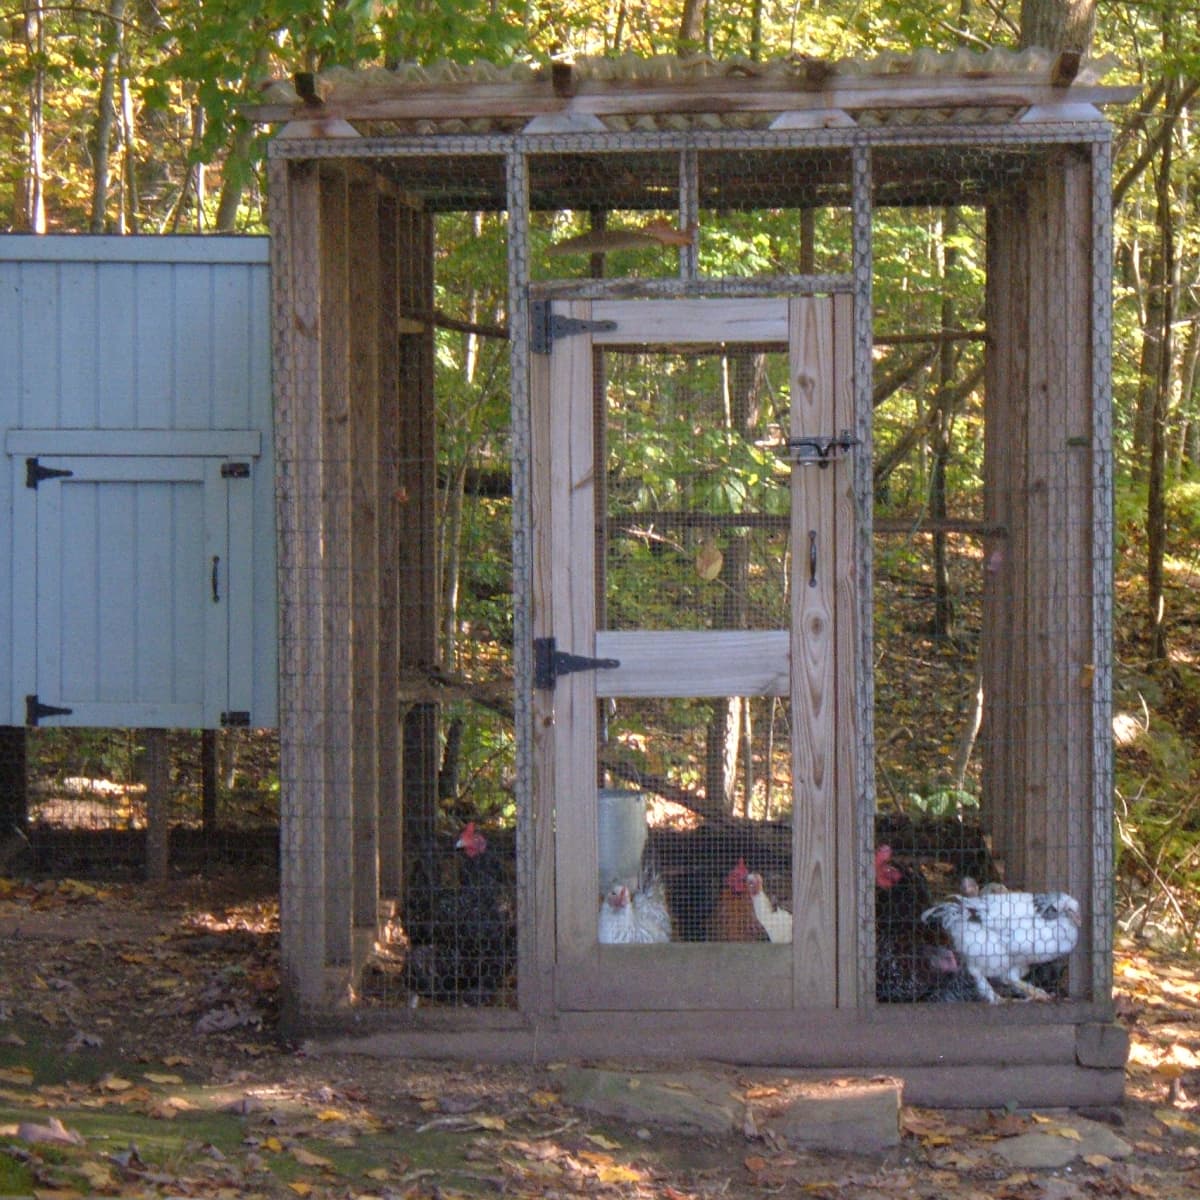 Rodent Control in and Around Backyard Chicken Coops - Pests in the Urban  Landscape - ANR Blogs